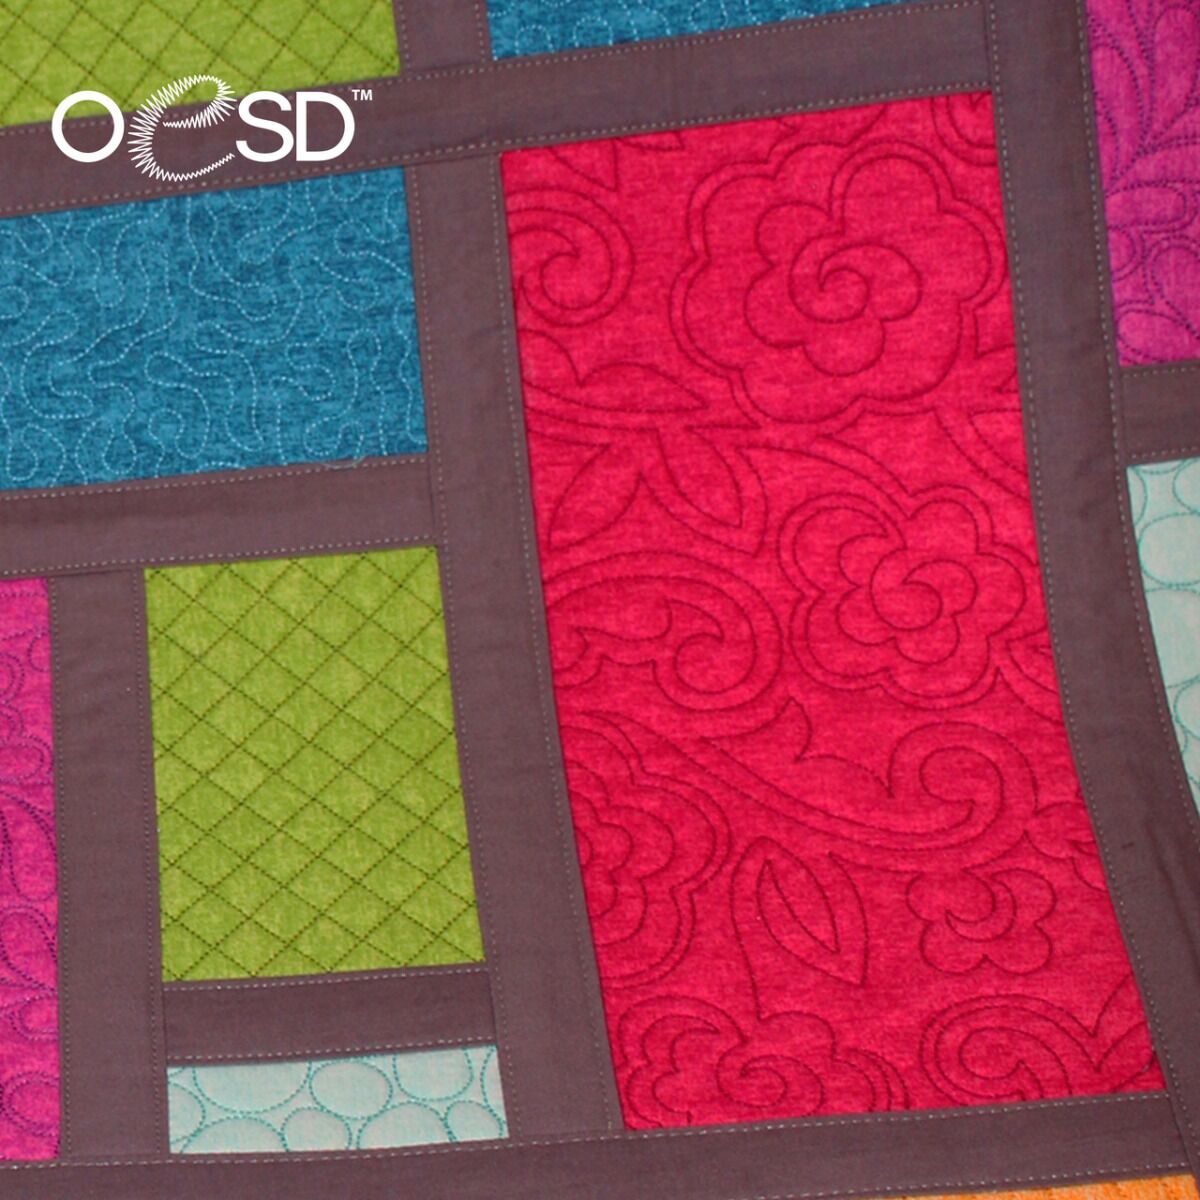 Disk OESD Fill It Up Quilting,Disk OESD Fill It Up Quilting,Disk OESD Fill It Up Quilting,Disk OESD Fill It Up Quilting,Disk OESD Fill It Up Quilting